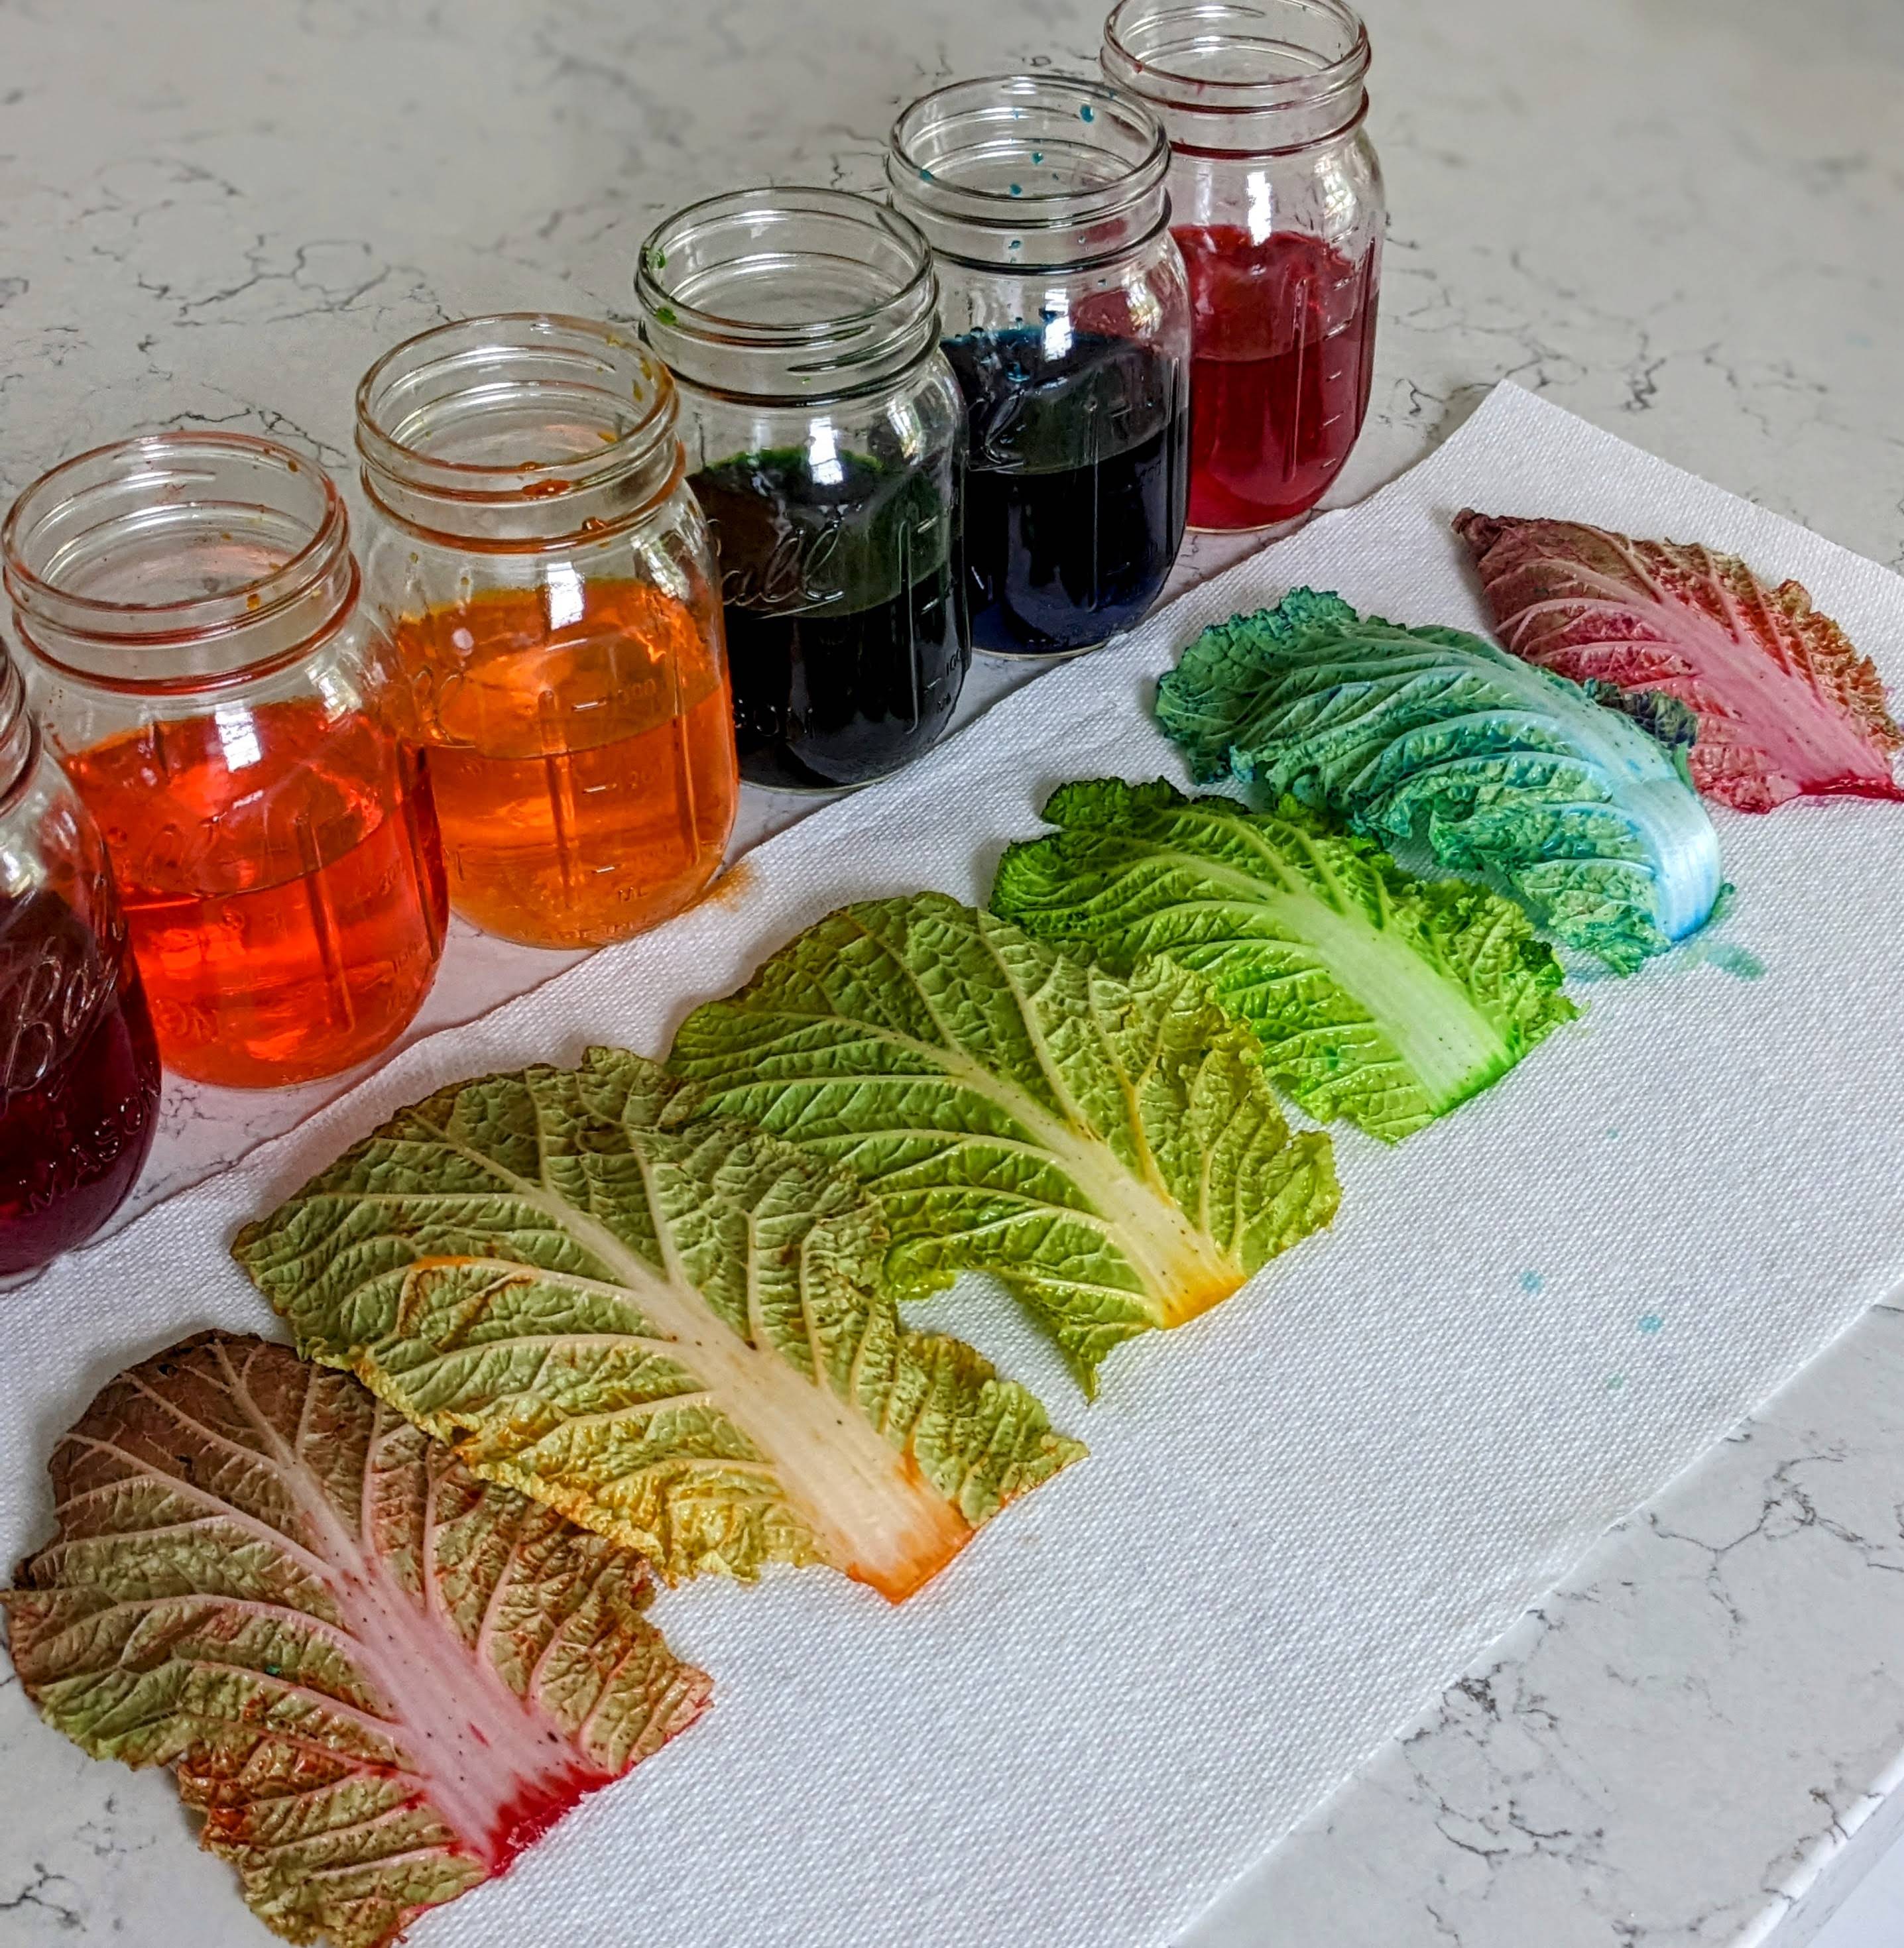 science Cabbage experiment for kids rainbow colors